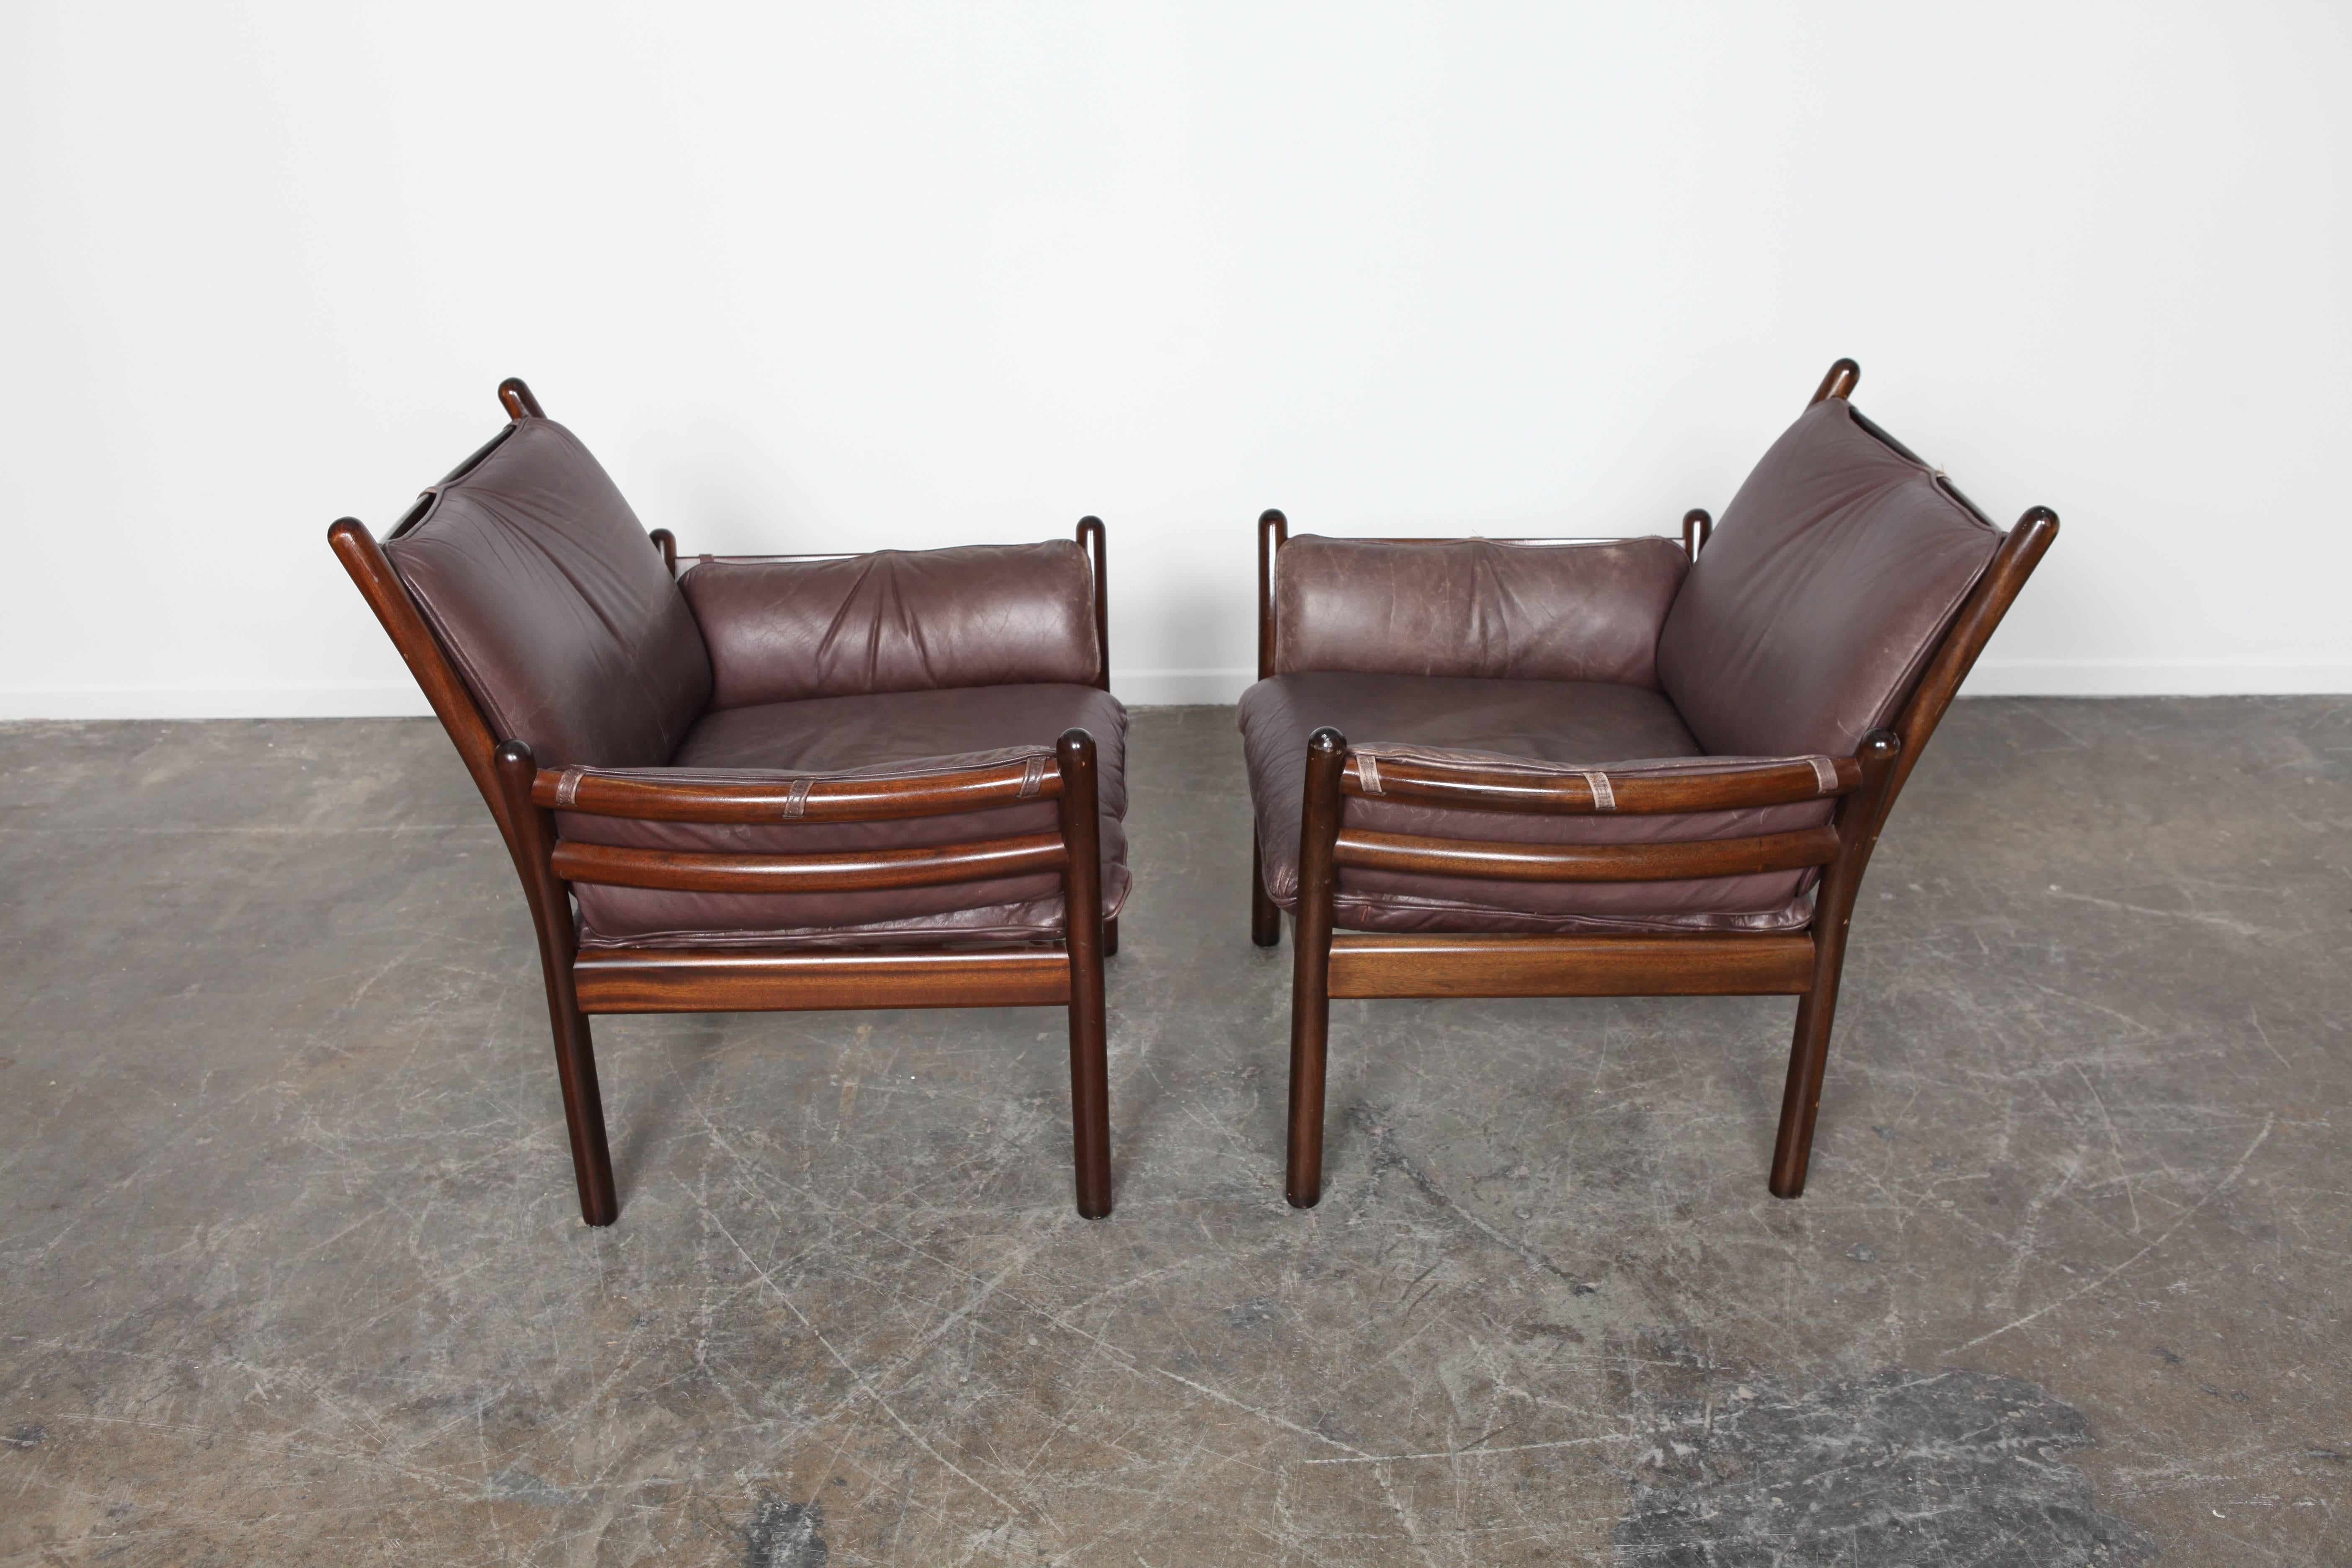 Mid-20th Century Pair of Mid-Century Modern Leather Lounge Chairs by Illum Wikkelsø